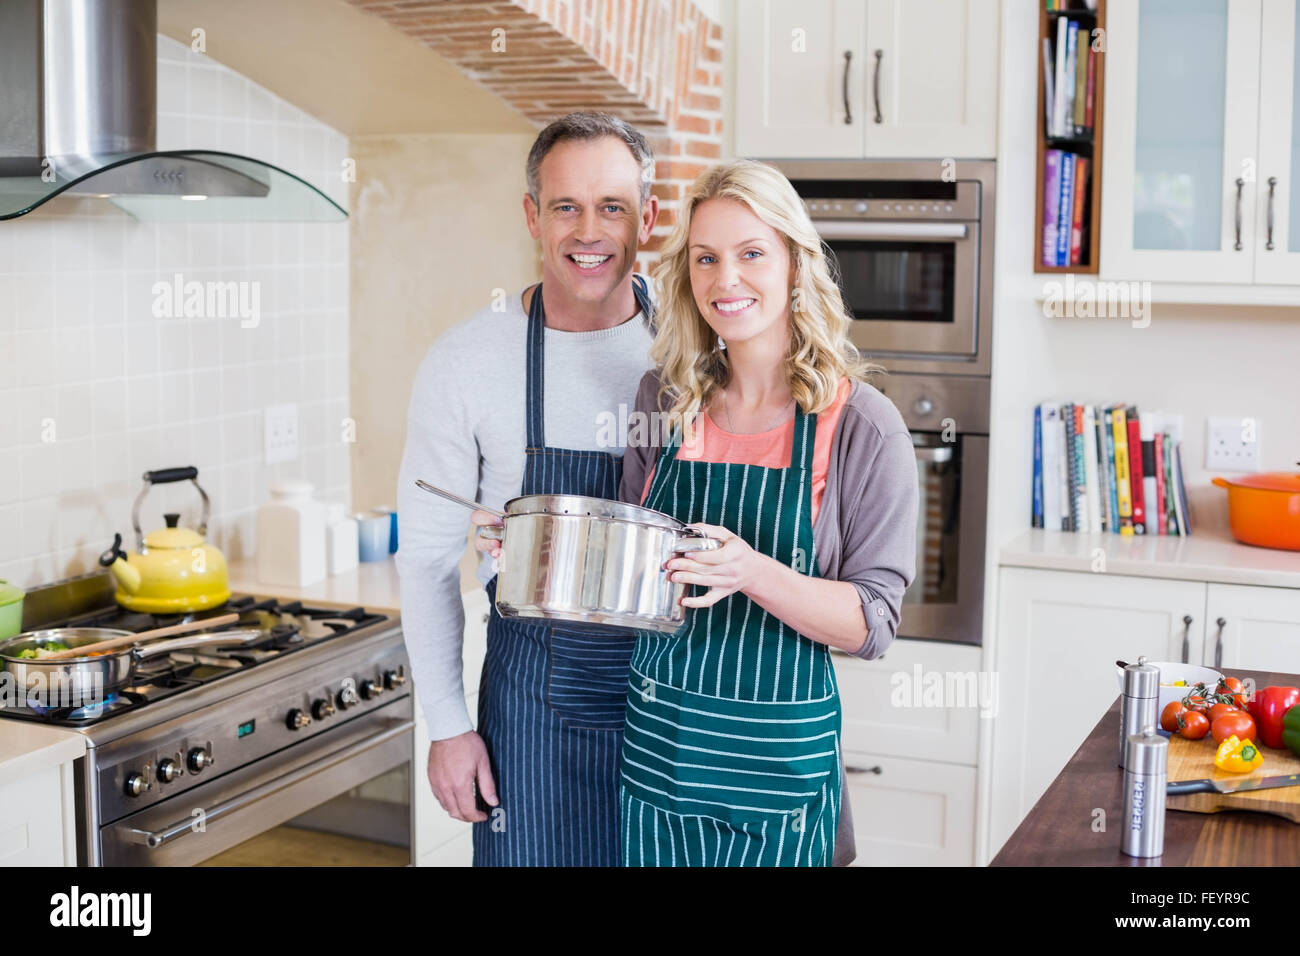 Cute couple cooking Stock Photo